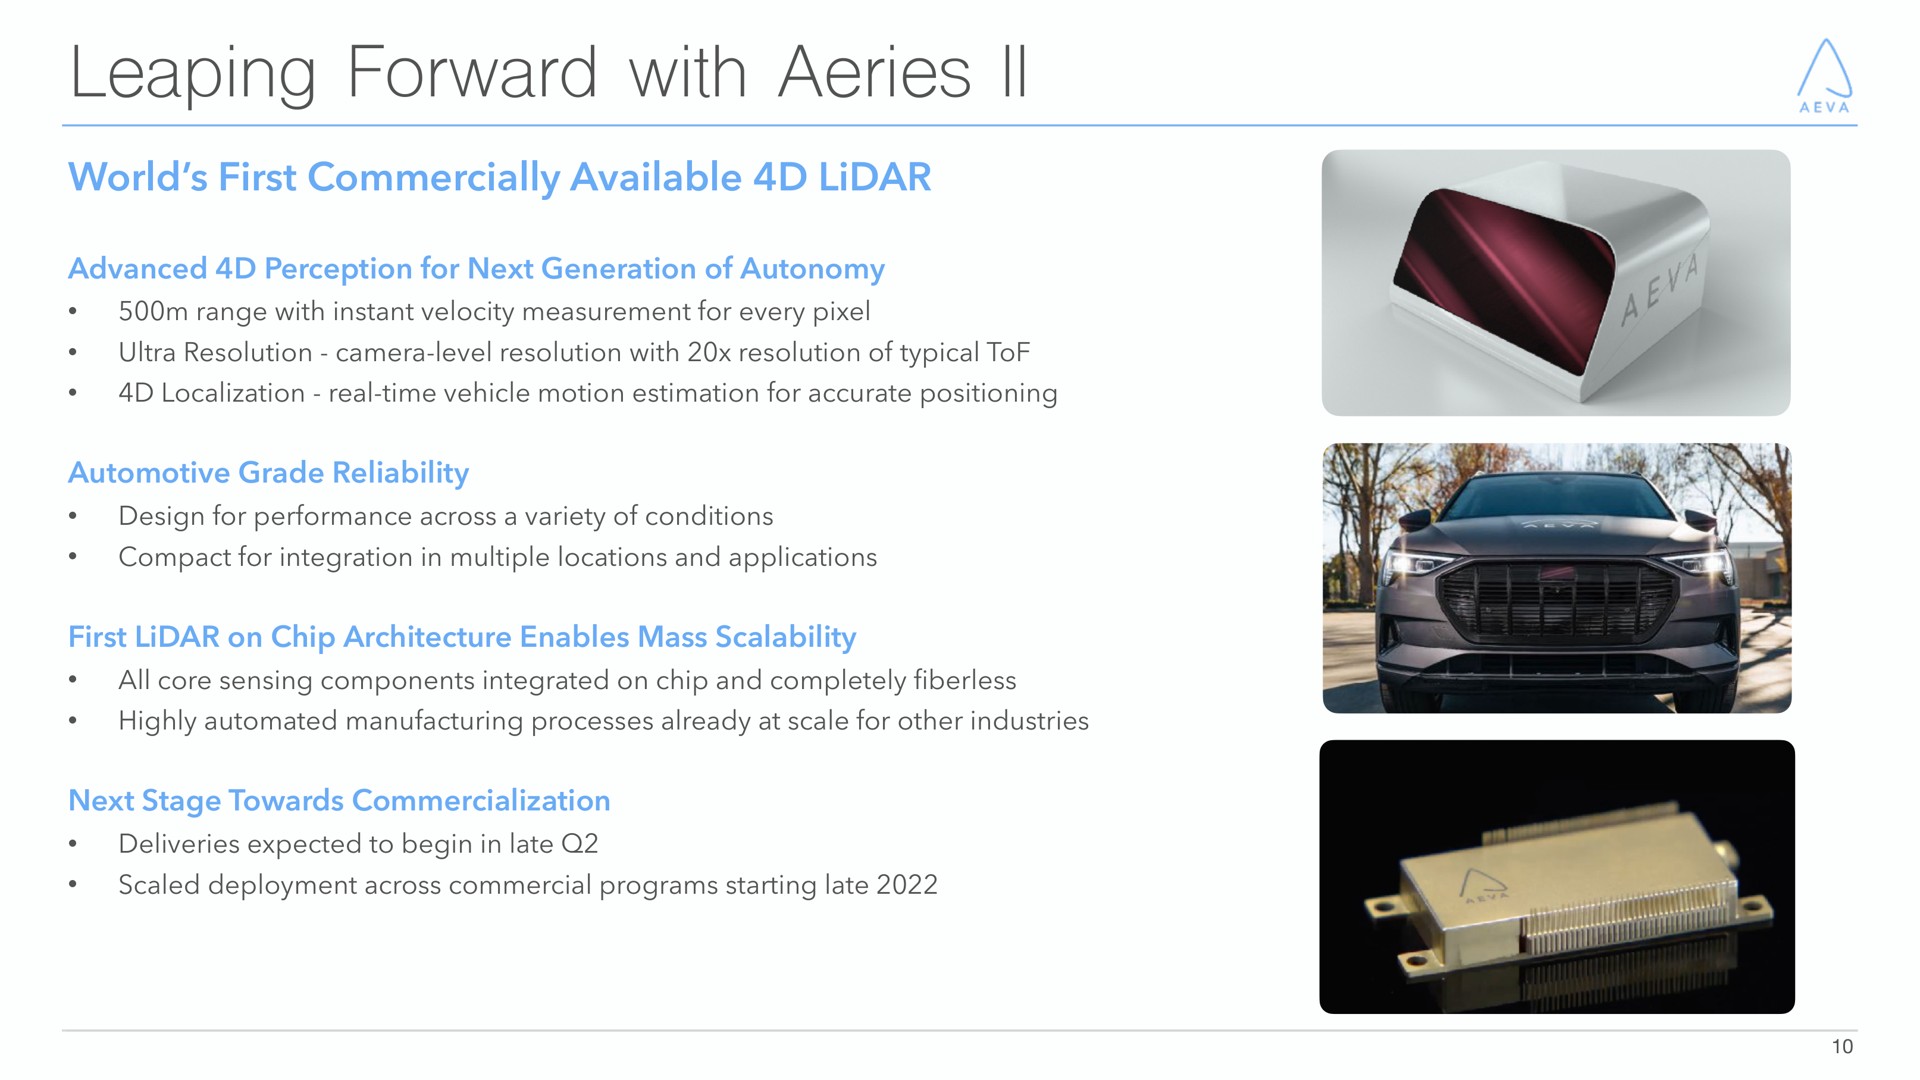 leaping forward with aeries | Aeva